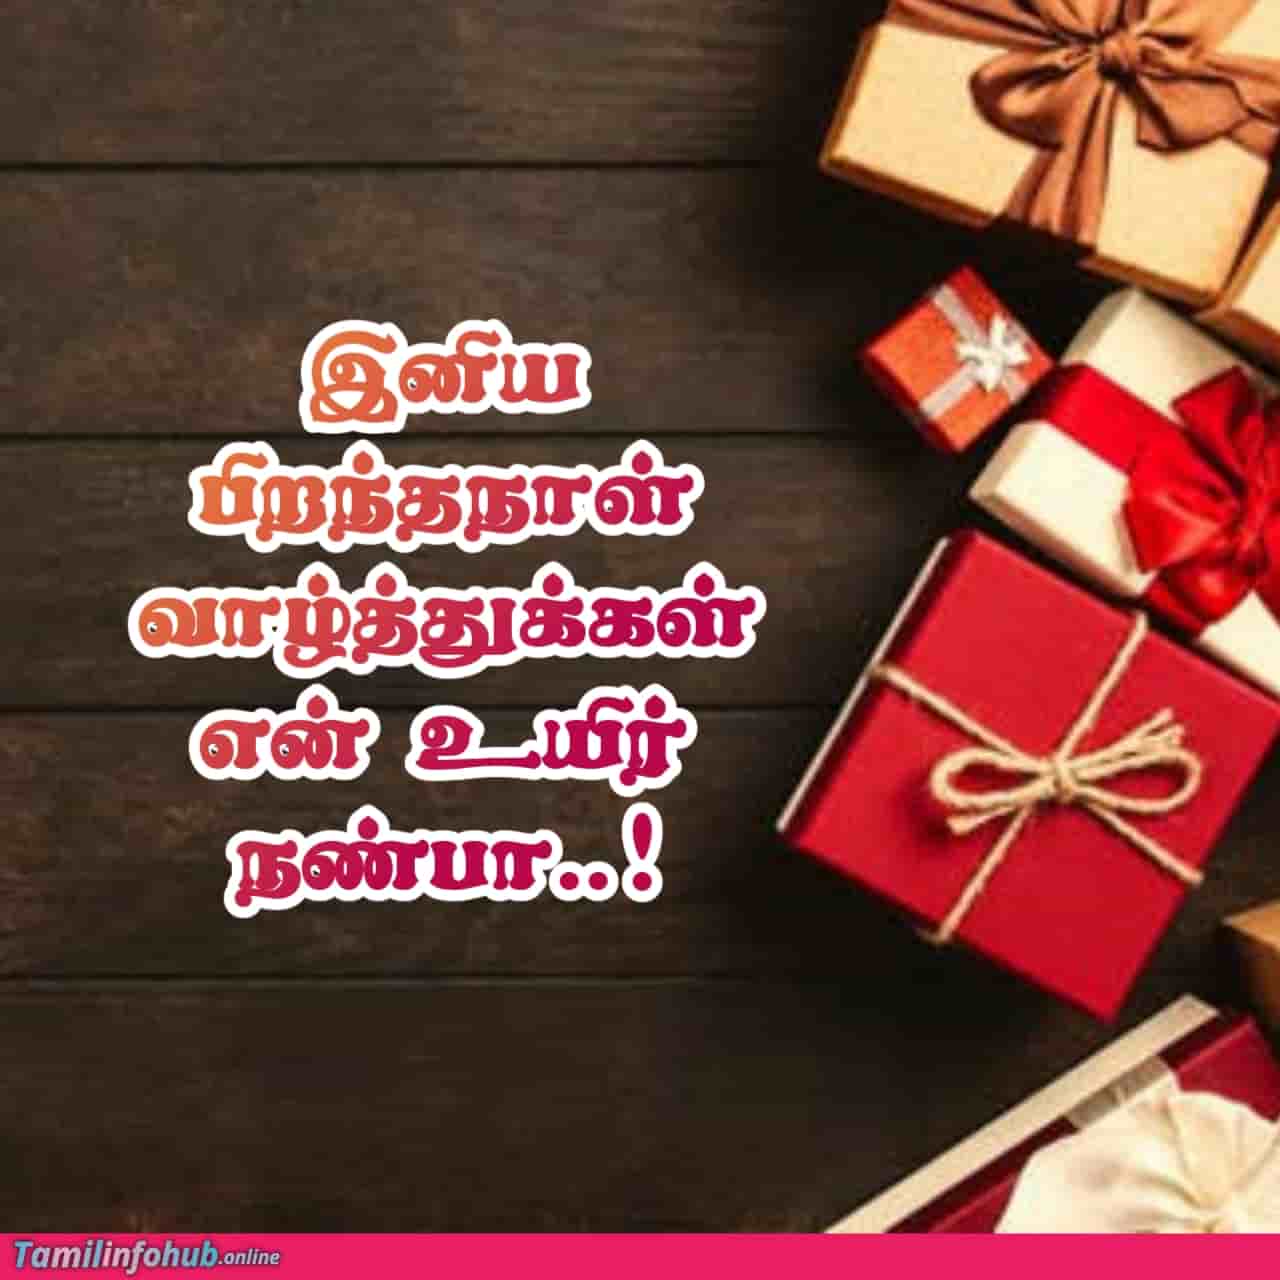 Birthday wishes in Tamil for friend